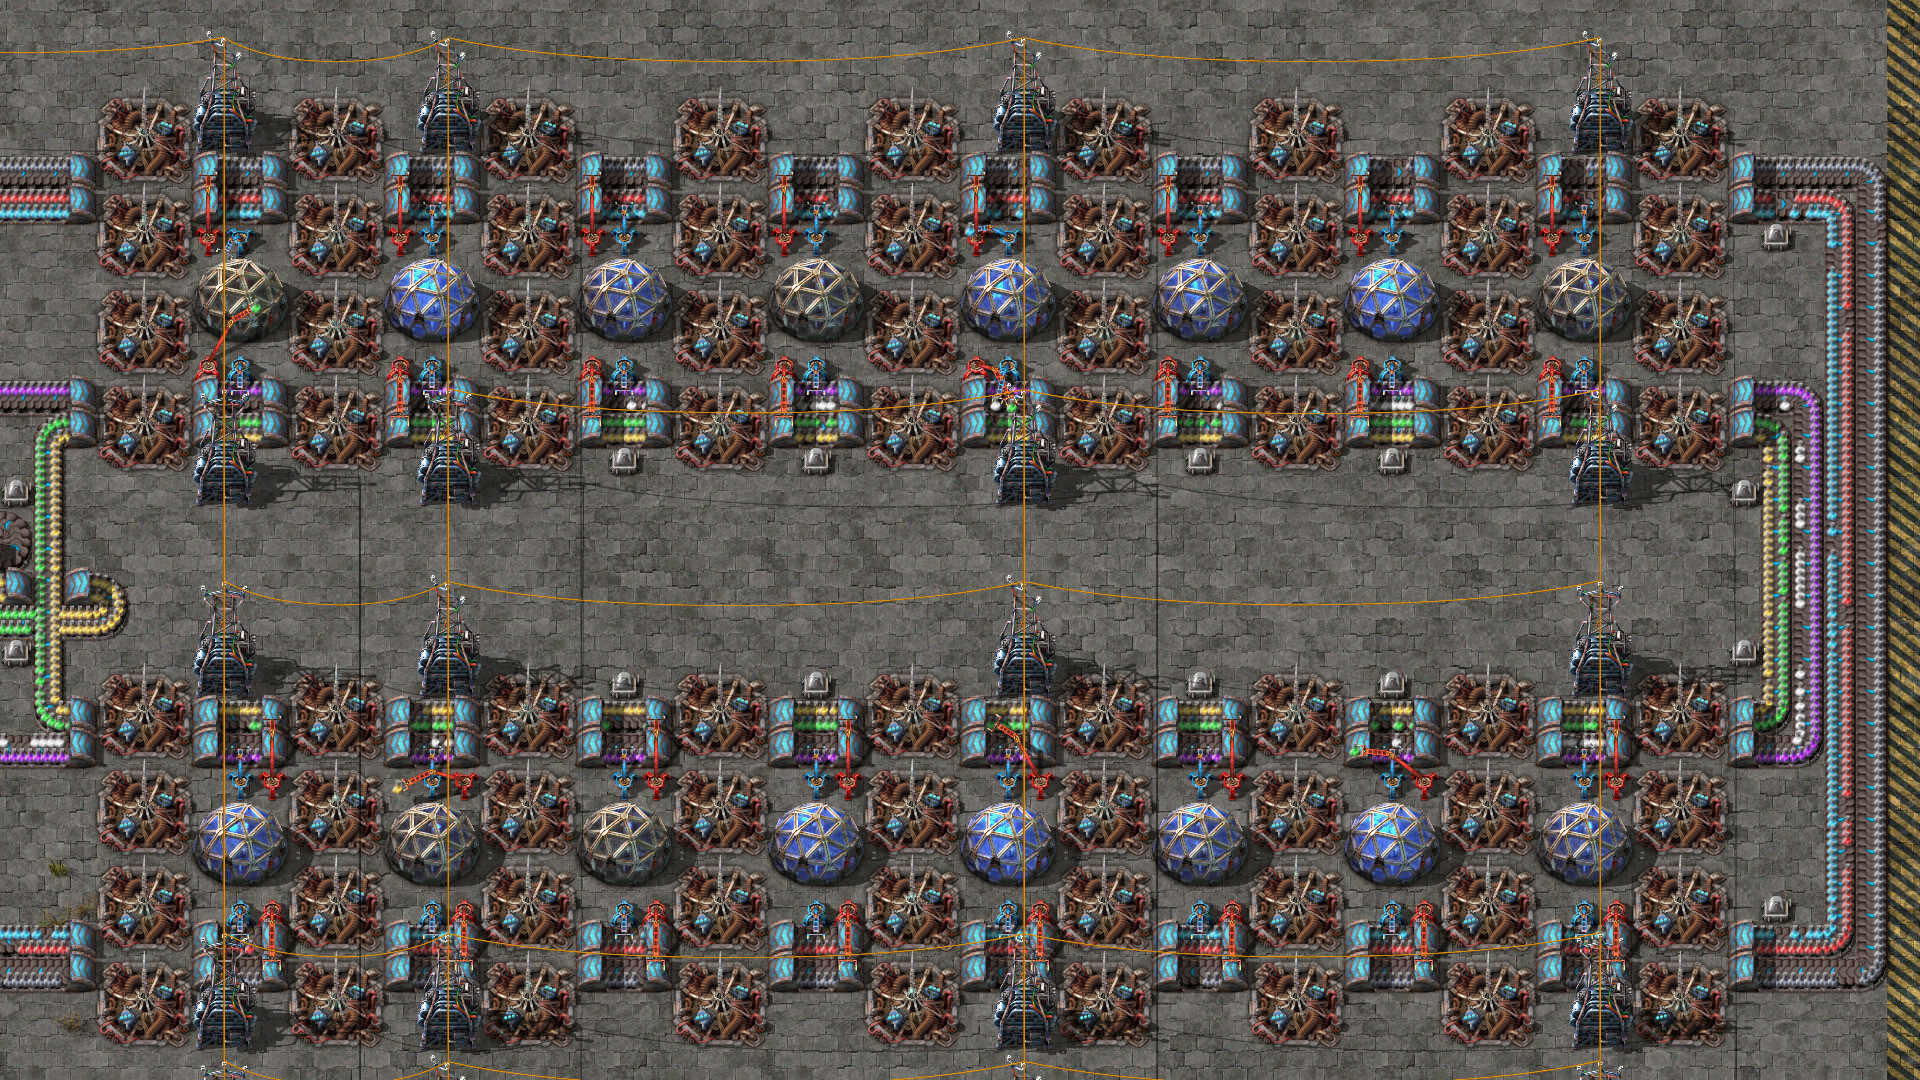 factorio download standonly with steam copy